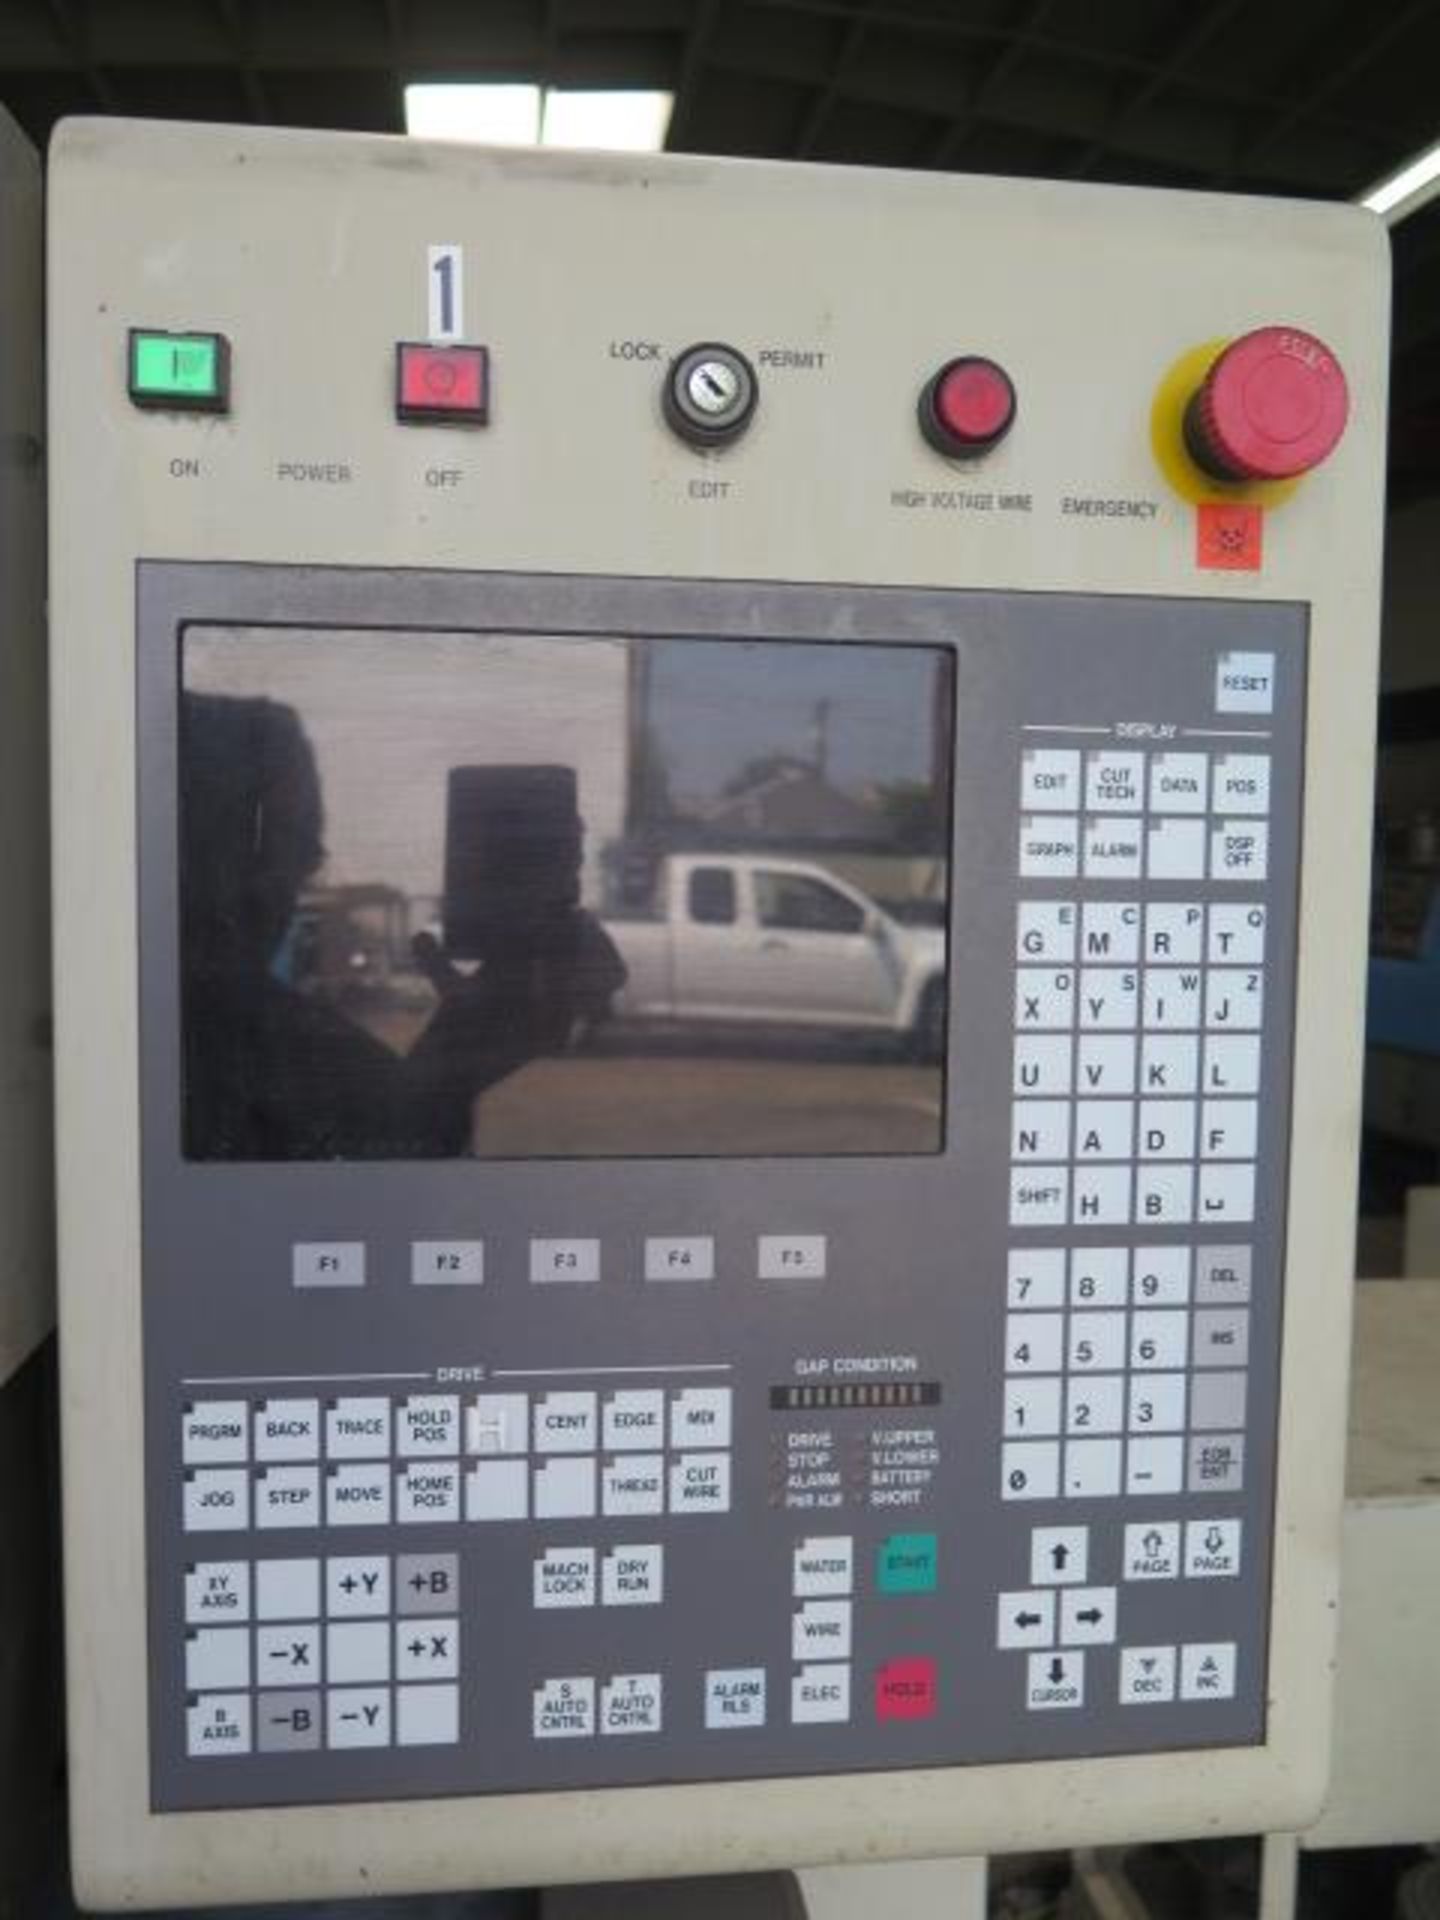 Brother HS-3100 CNC Wire EDM s/n 111120 w/ Brother CNC Controls, 8 3/4" x 11" Work Area, SOLD AS IS - Image 4 of 13